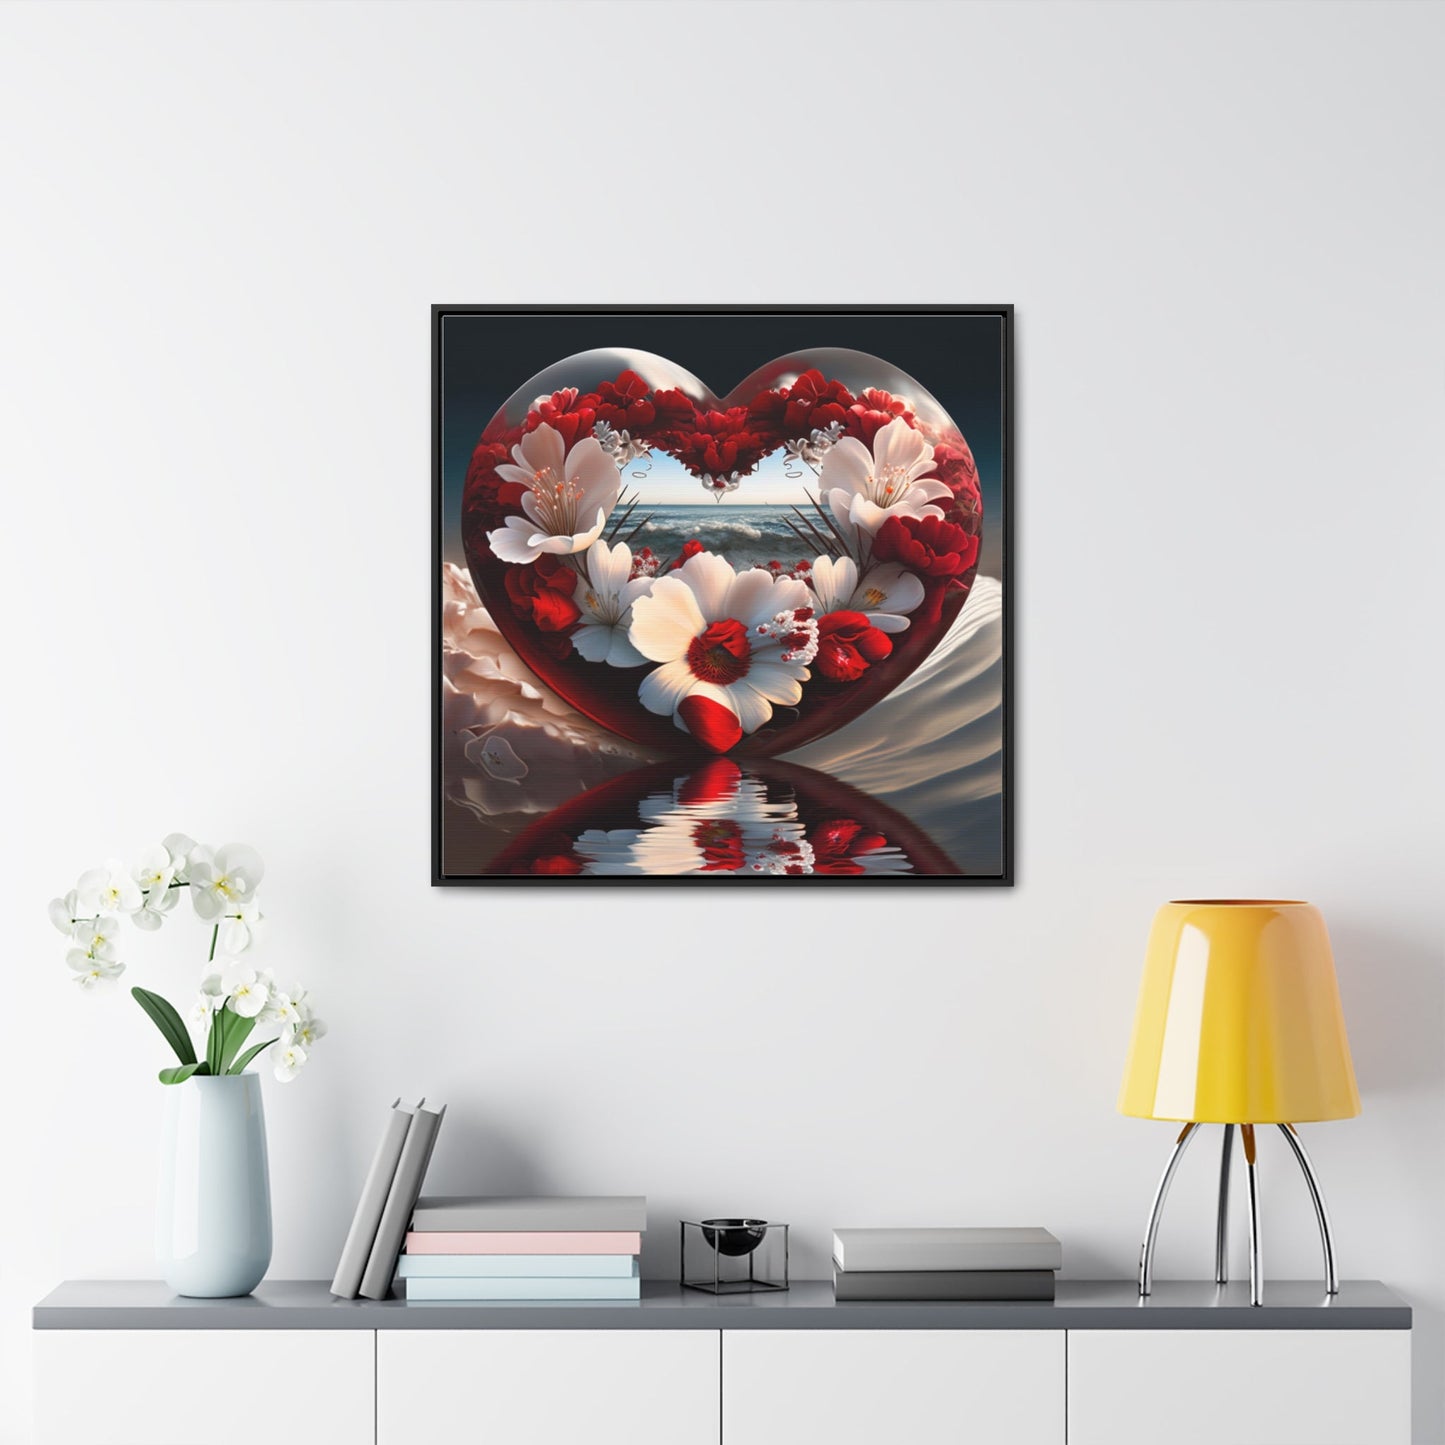 Heart Reflected On Ocean Waves Gallery Canvas Wraps, Square Frame-Shalav5